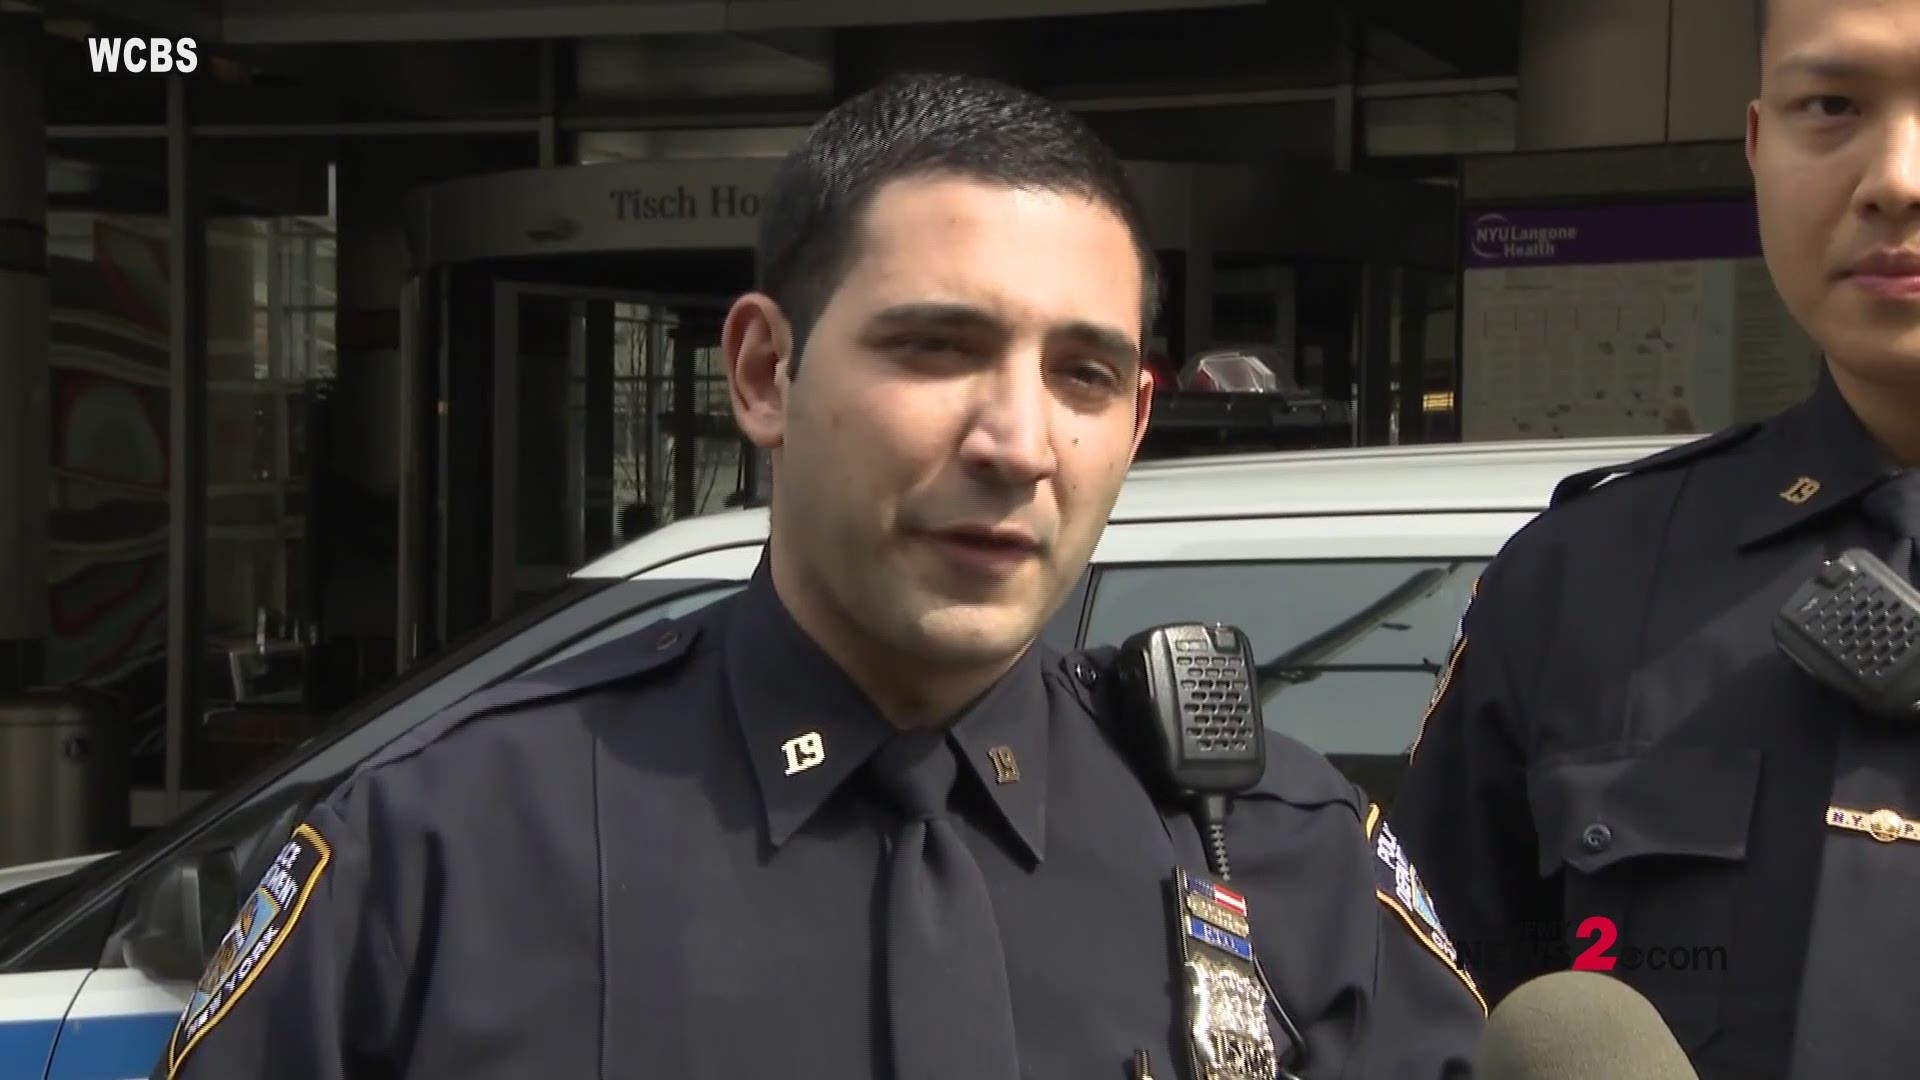 NYPD officers help deliver baby girl on side of road